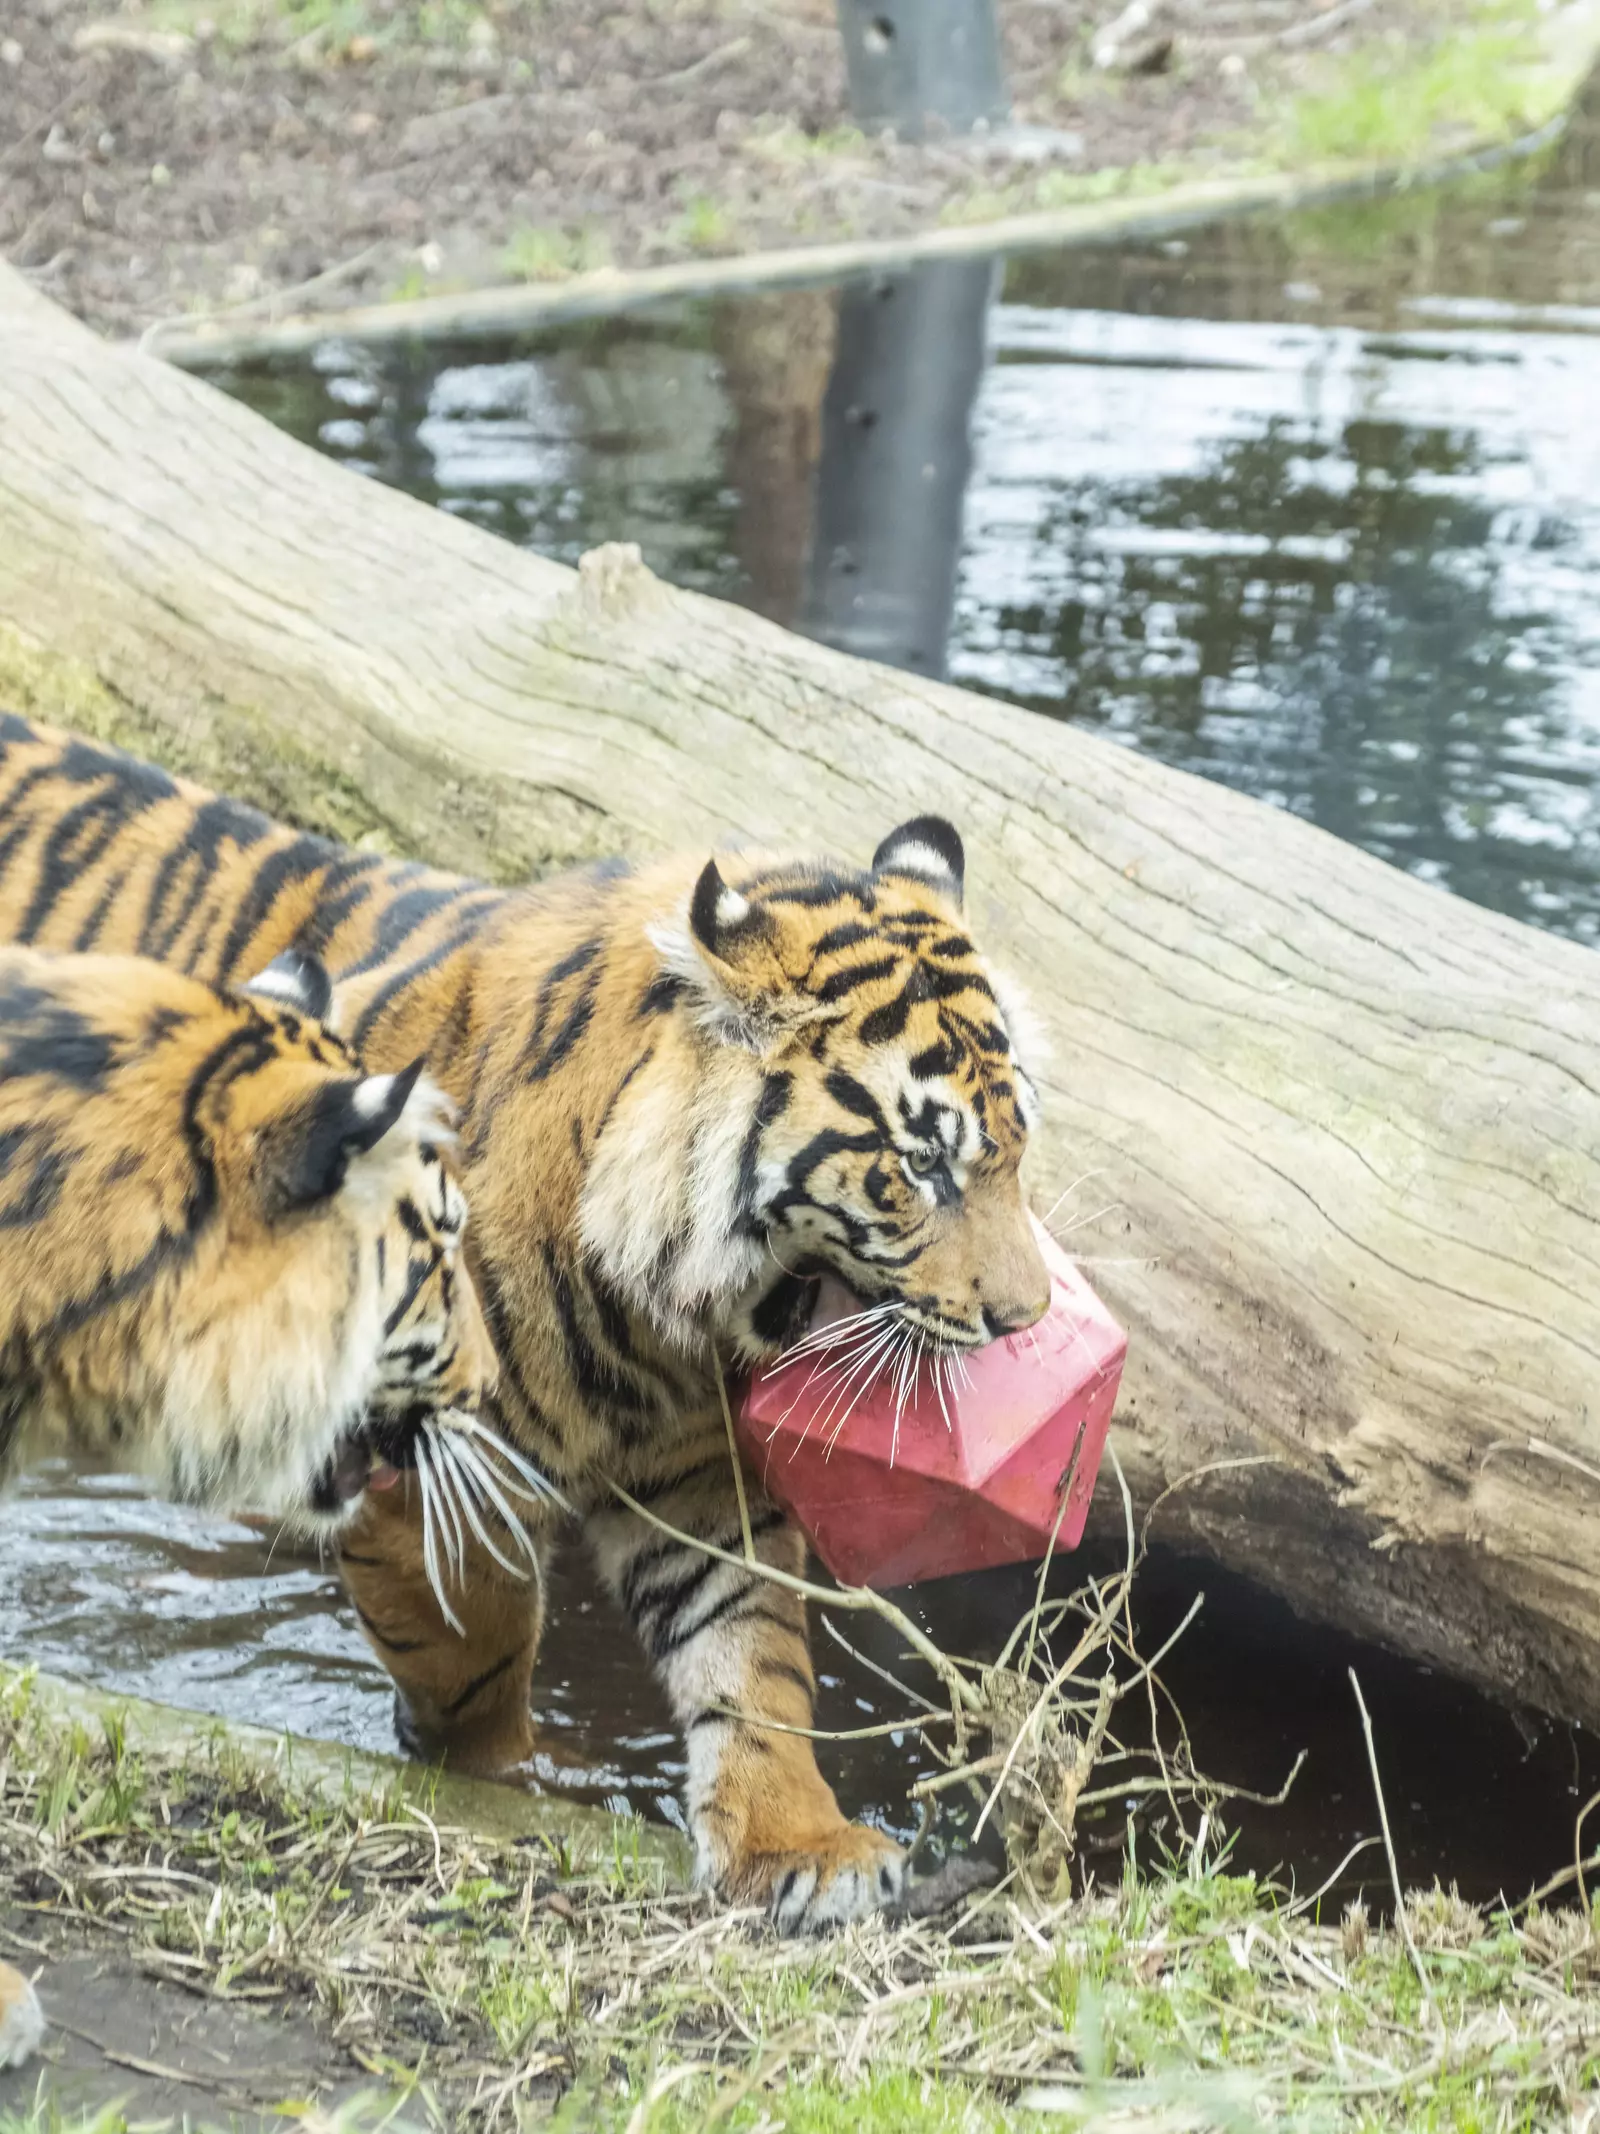 Tigers playing with enrichment